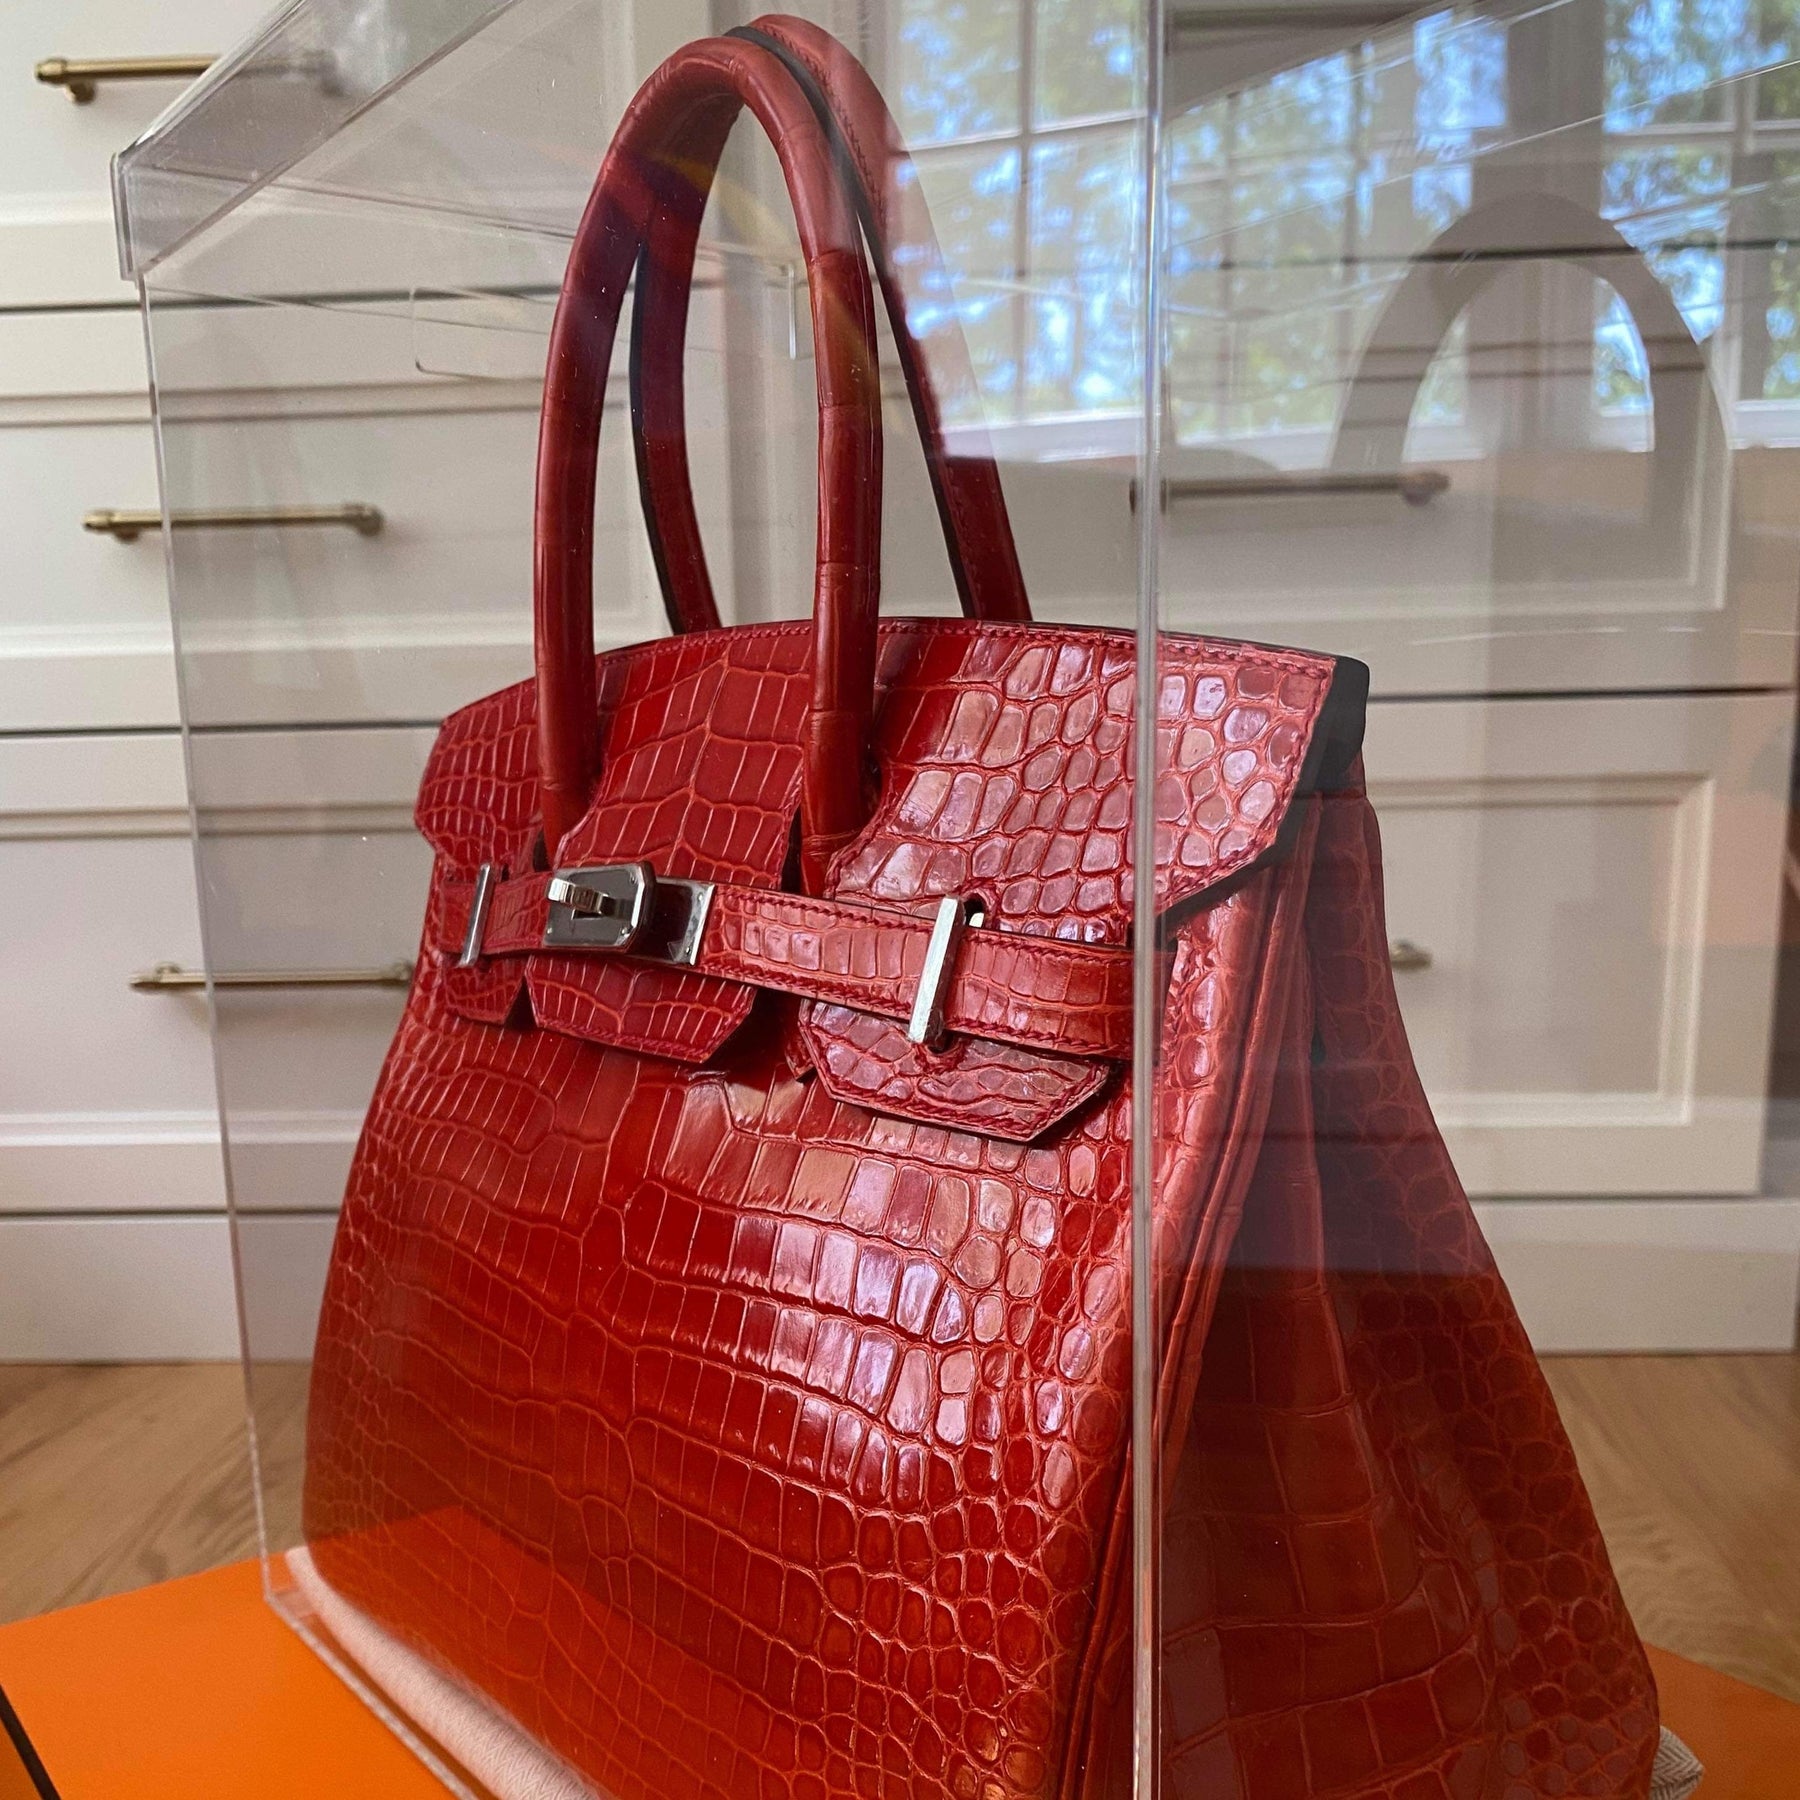 Hermes Birkin Bags Prices And Sizes